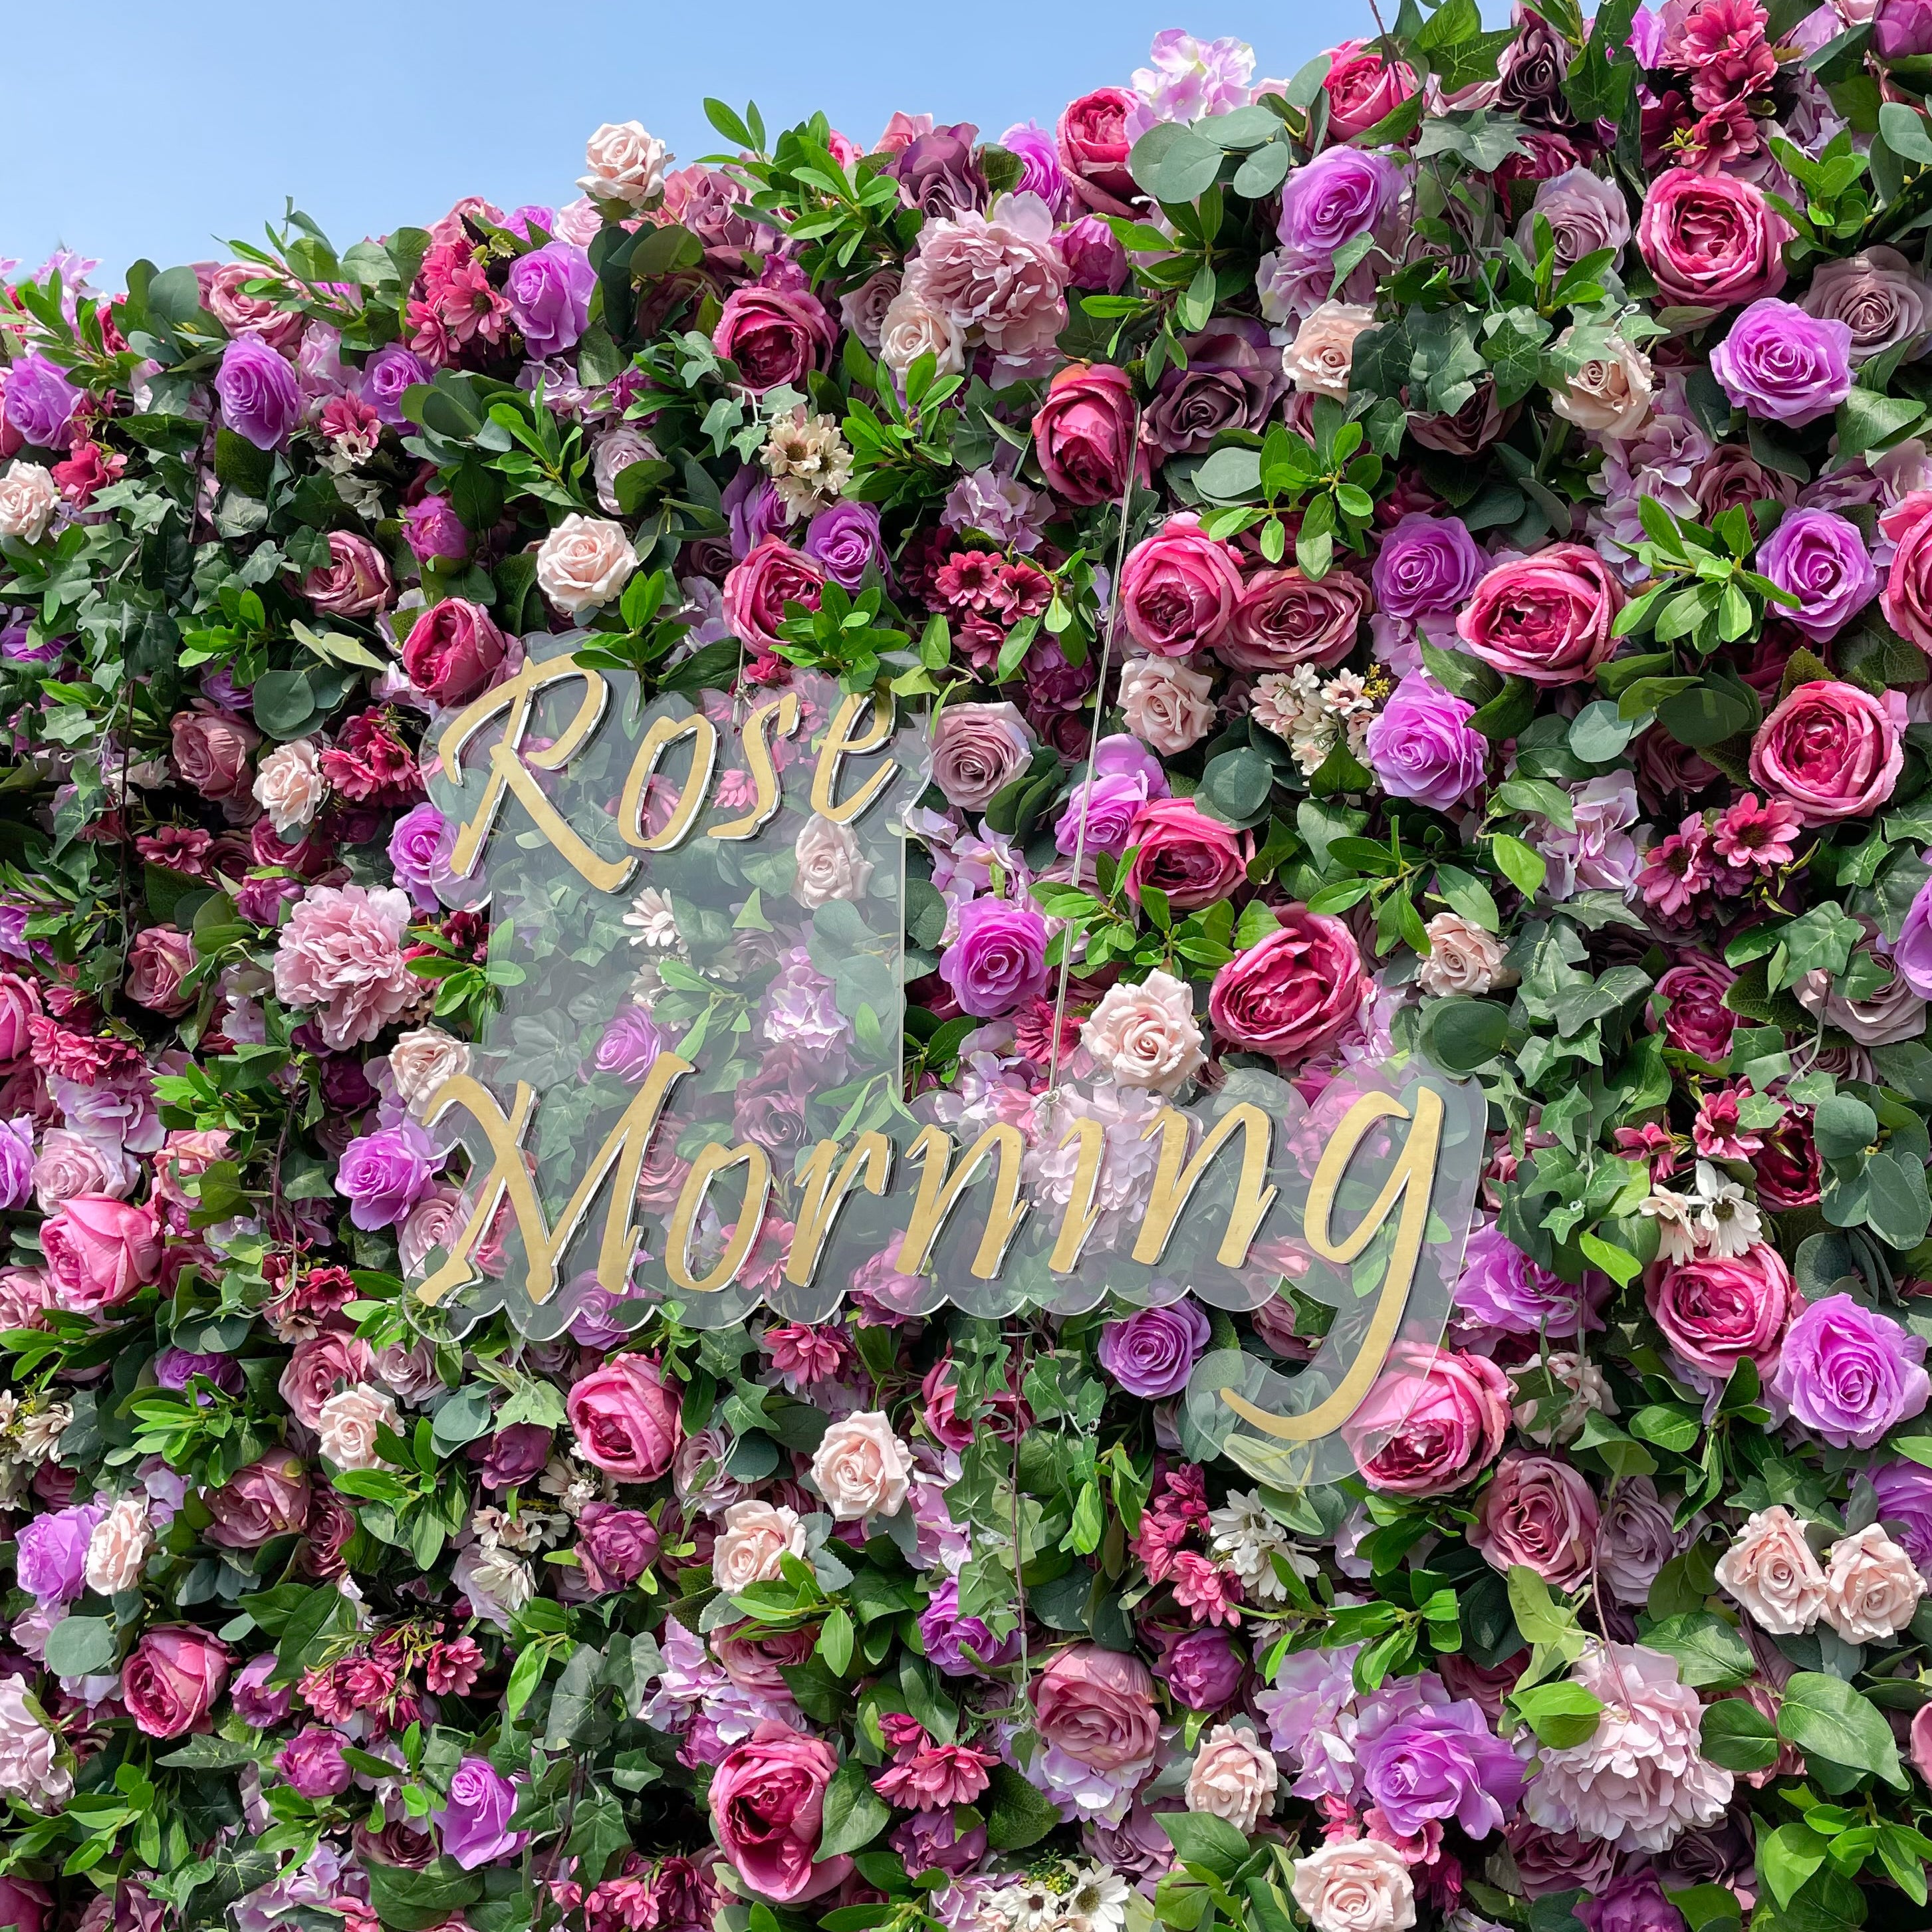 May：3D Fabric Artificial rolling up curtain flower wall Rose Morning